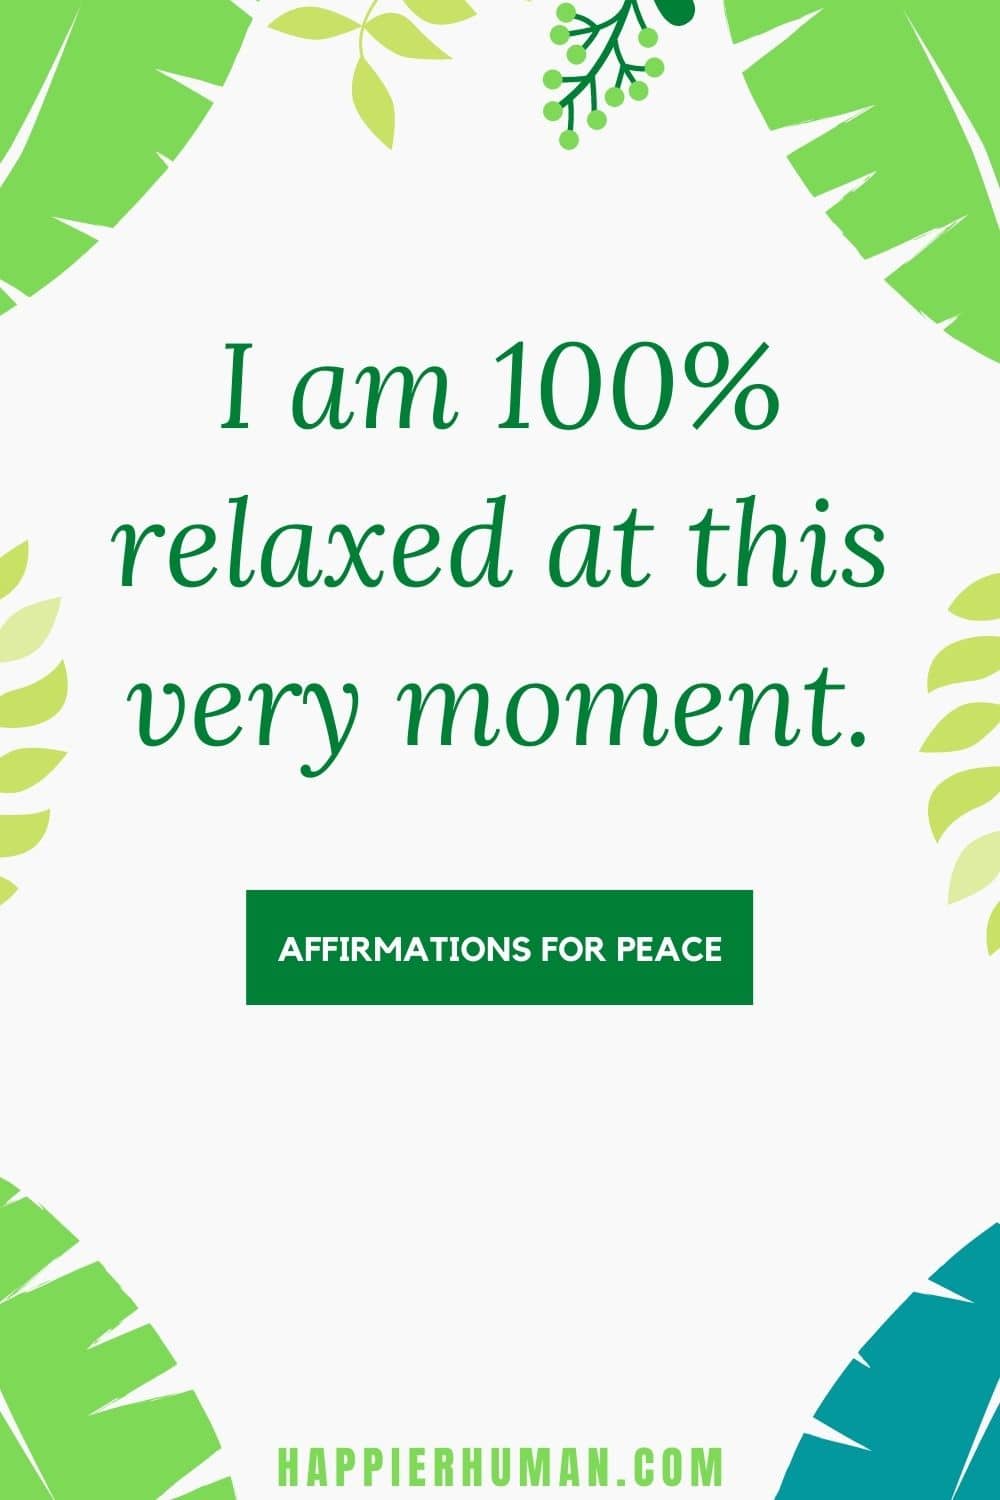 Affirmations for Peace - I am 100% relaxed at this very moment. | affirmations for love | morning affirmations for peace | affirmations for inner work #peace #affirmations #calm